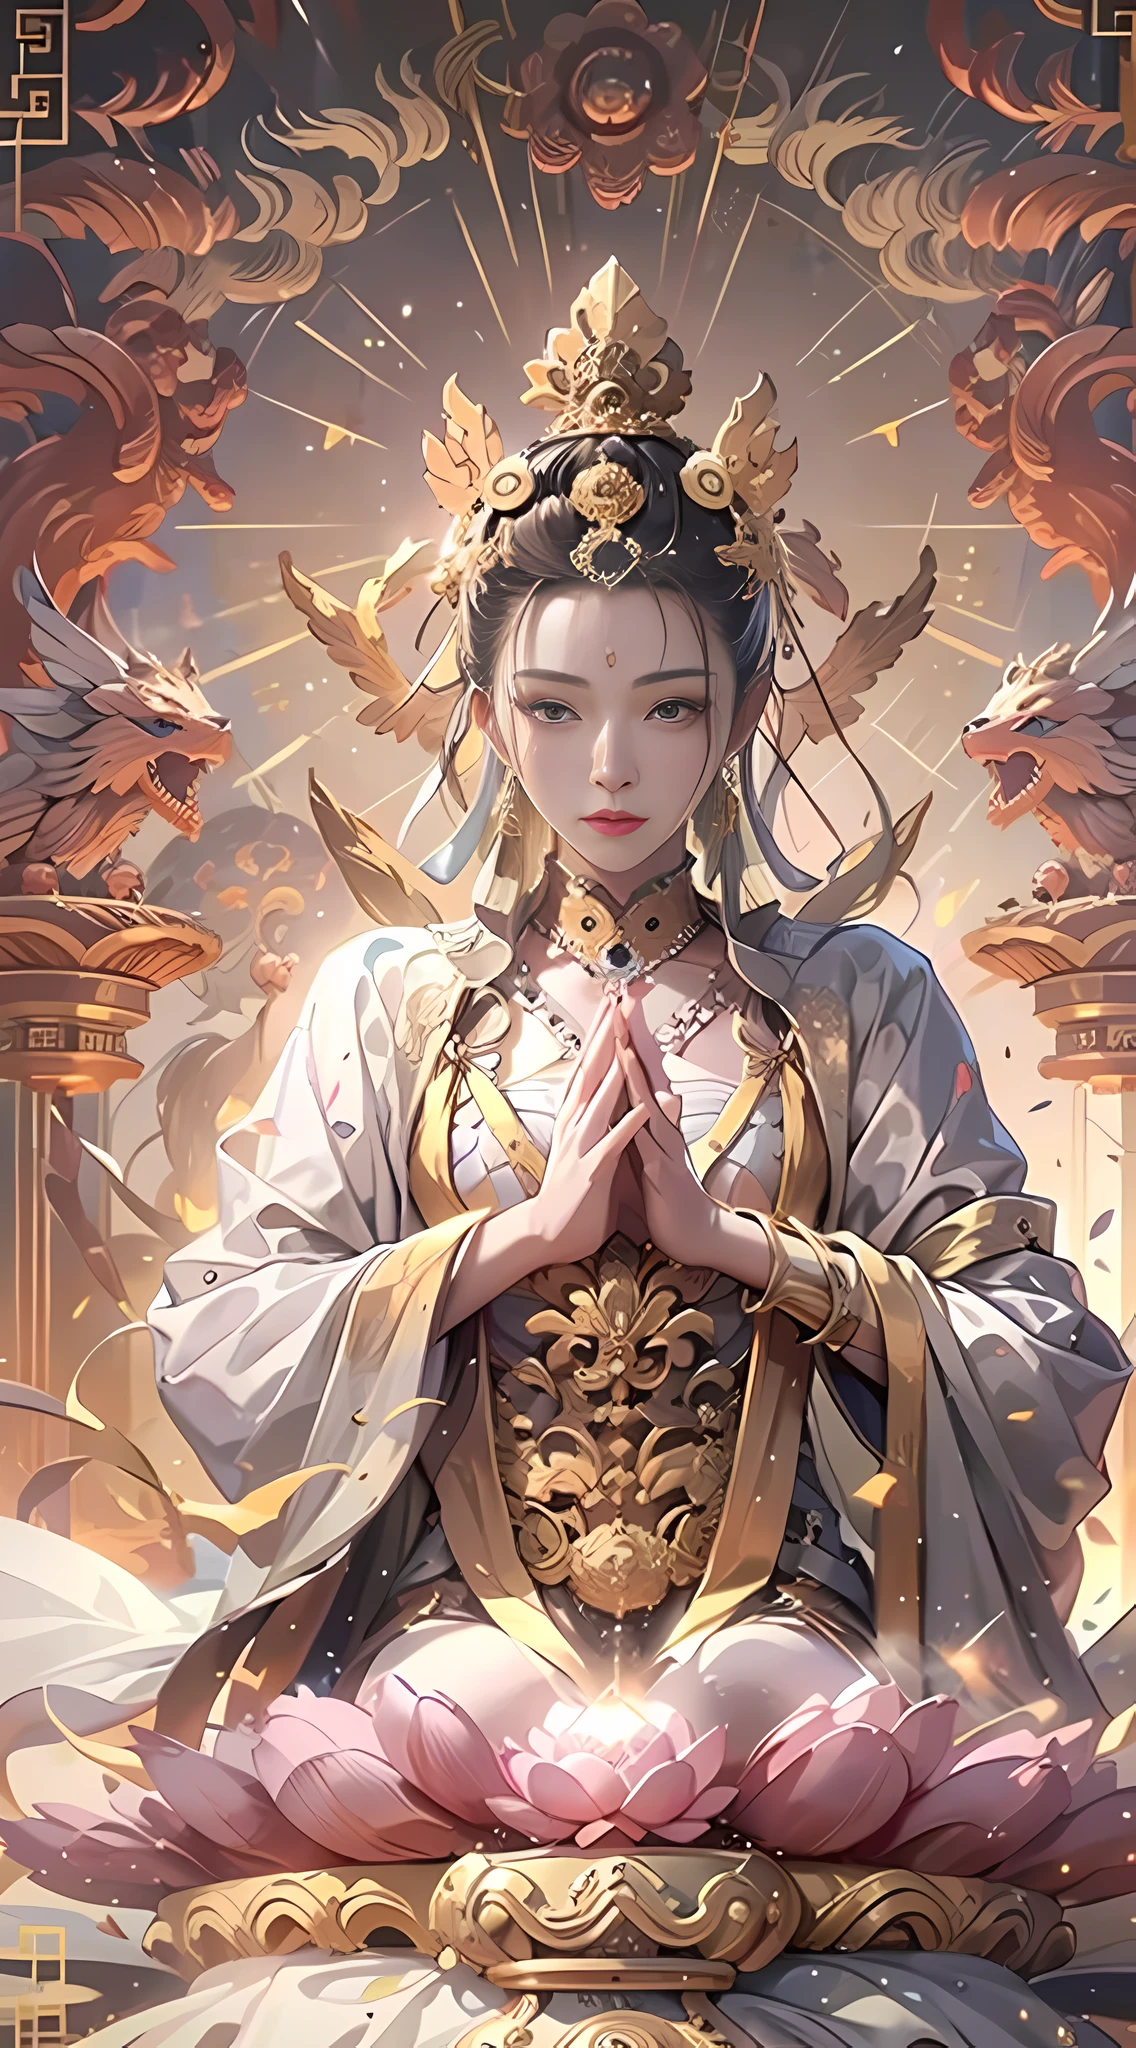 （Chinese immortals）, （Buddhism）, multiple_Handythological stories）, （bodhisattva）, She sits on a lotus, （Six arms grew on her back, Each hand holds a different Buddhist vessel, left right symmetry），（Delicate and beautiful face）, （White silk robe）sitting on a lotus flower, Frontal photo，Light smile, neo-classical, OP Art, Chiaroscuro, Cinematic lighting, god light, Ray tracing, character sheets, projected inset, first person perspective, hyper HD, Masterpiece, ccurate, Textured skin, Super detail, High details, High quality, Award-Awarded, Best quality, A high resolution, 8K